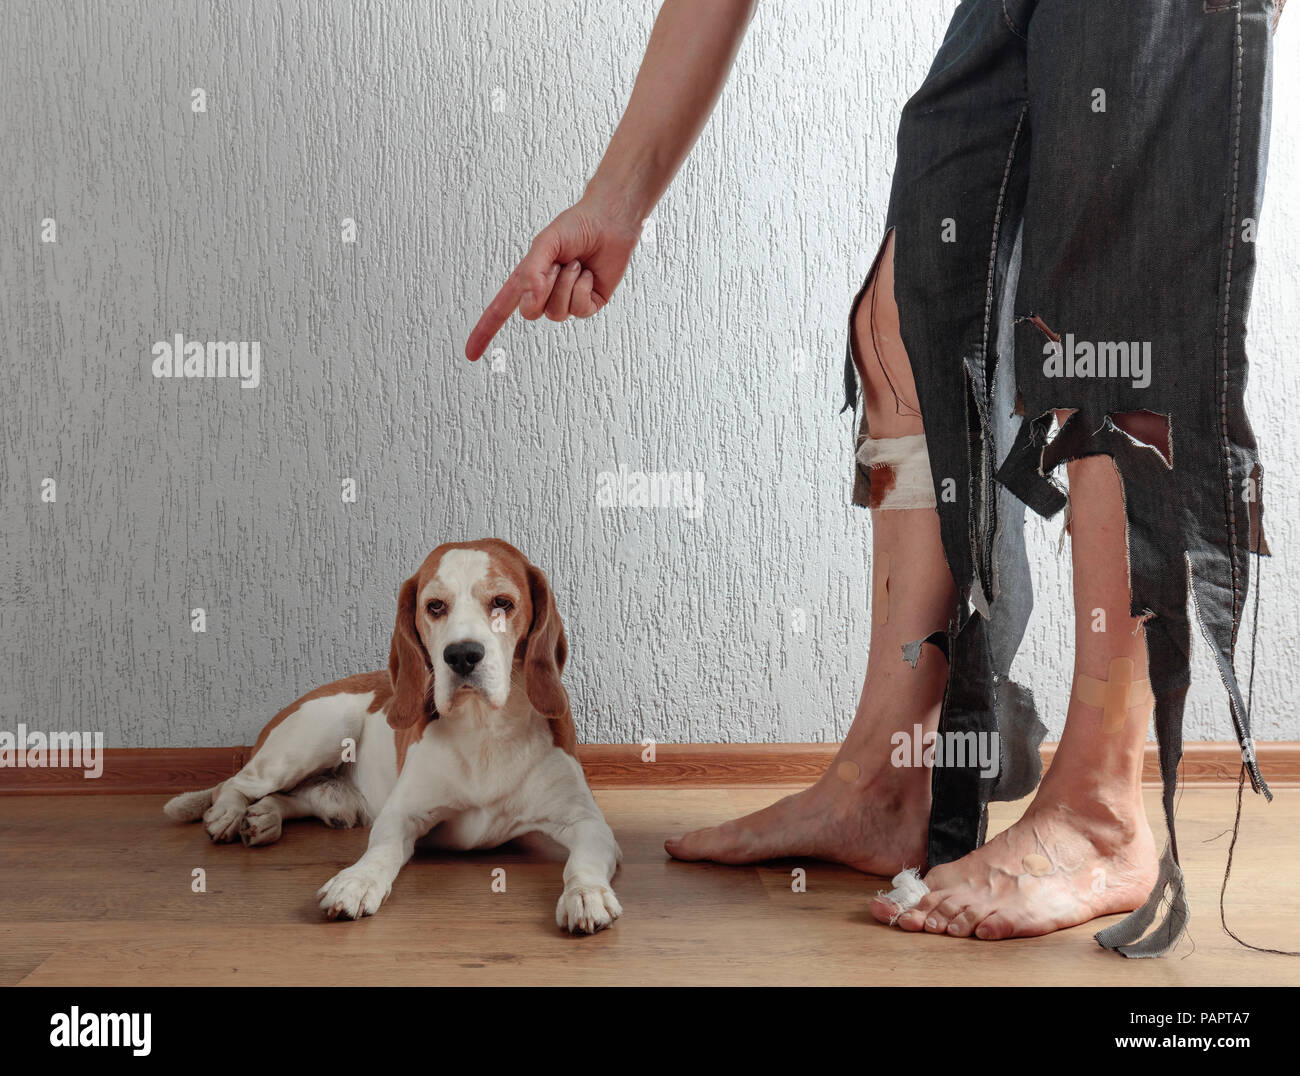 Cute Beagle and his owner in torn pants and bitten feet. Conceptual image on the theme of animal education. Stock Photo